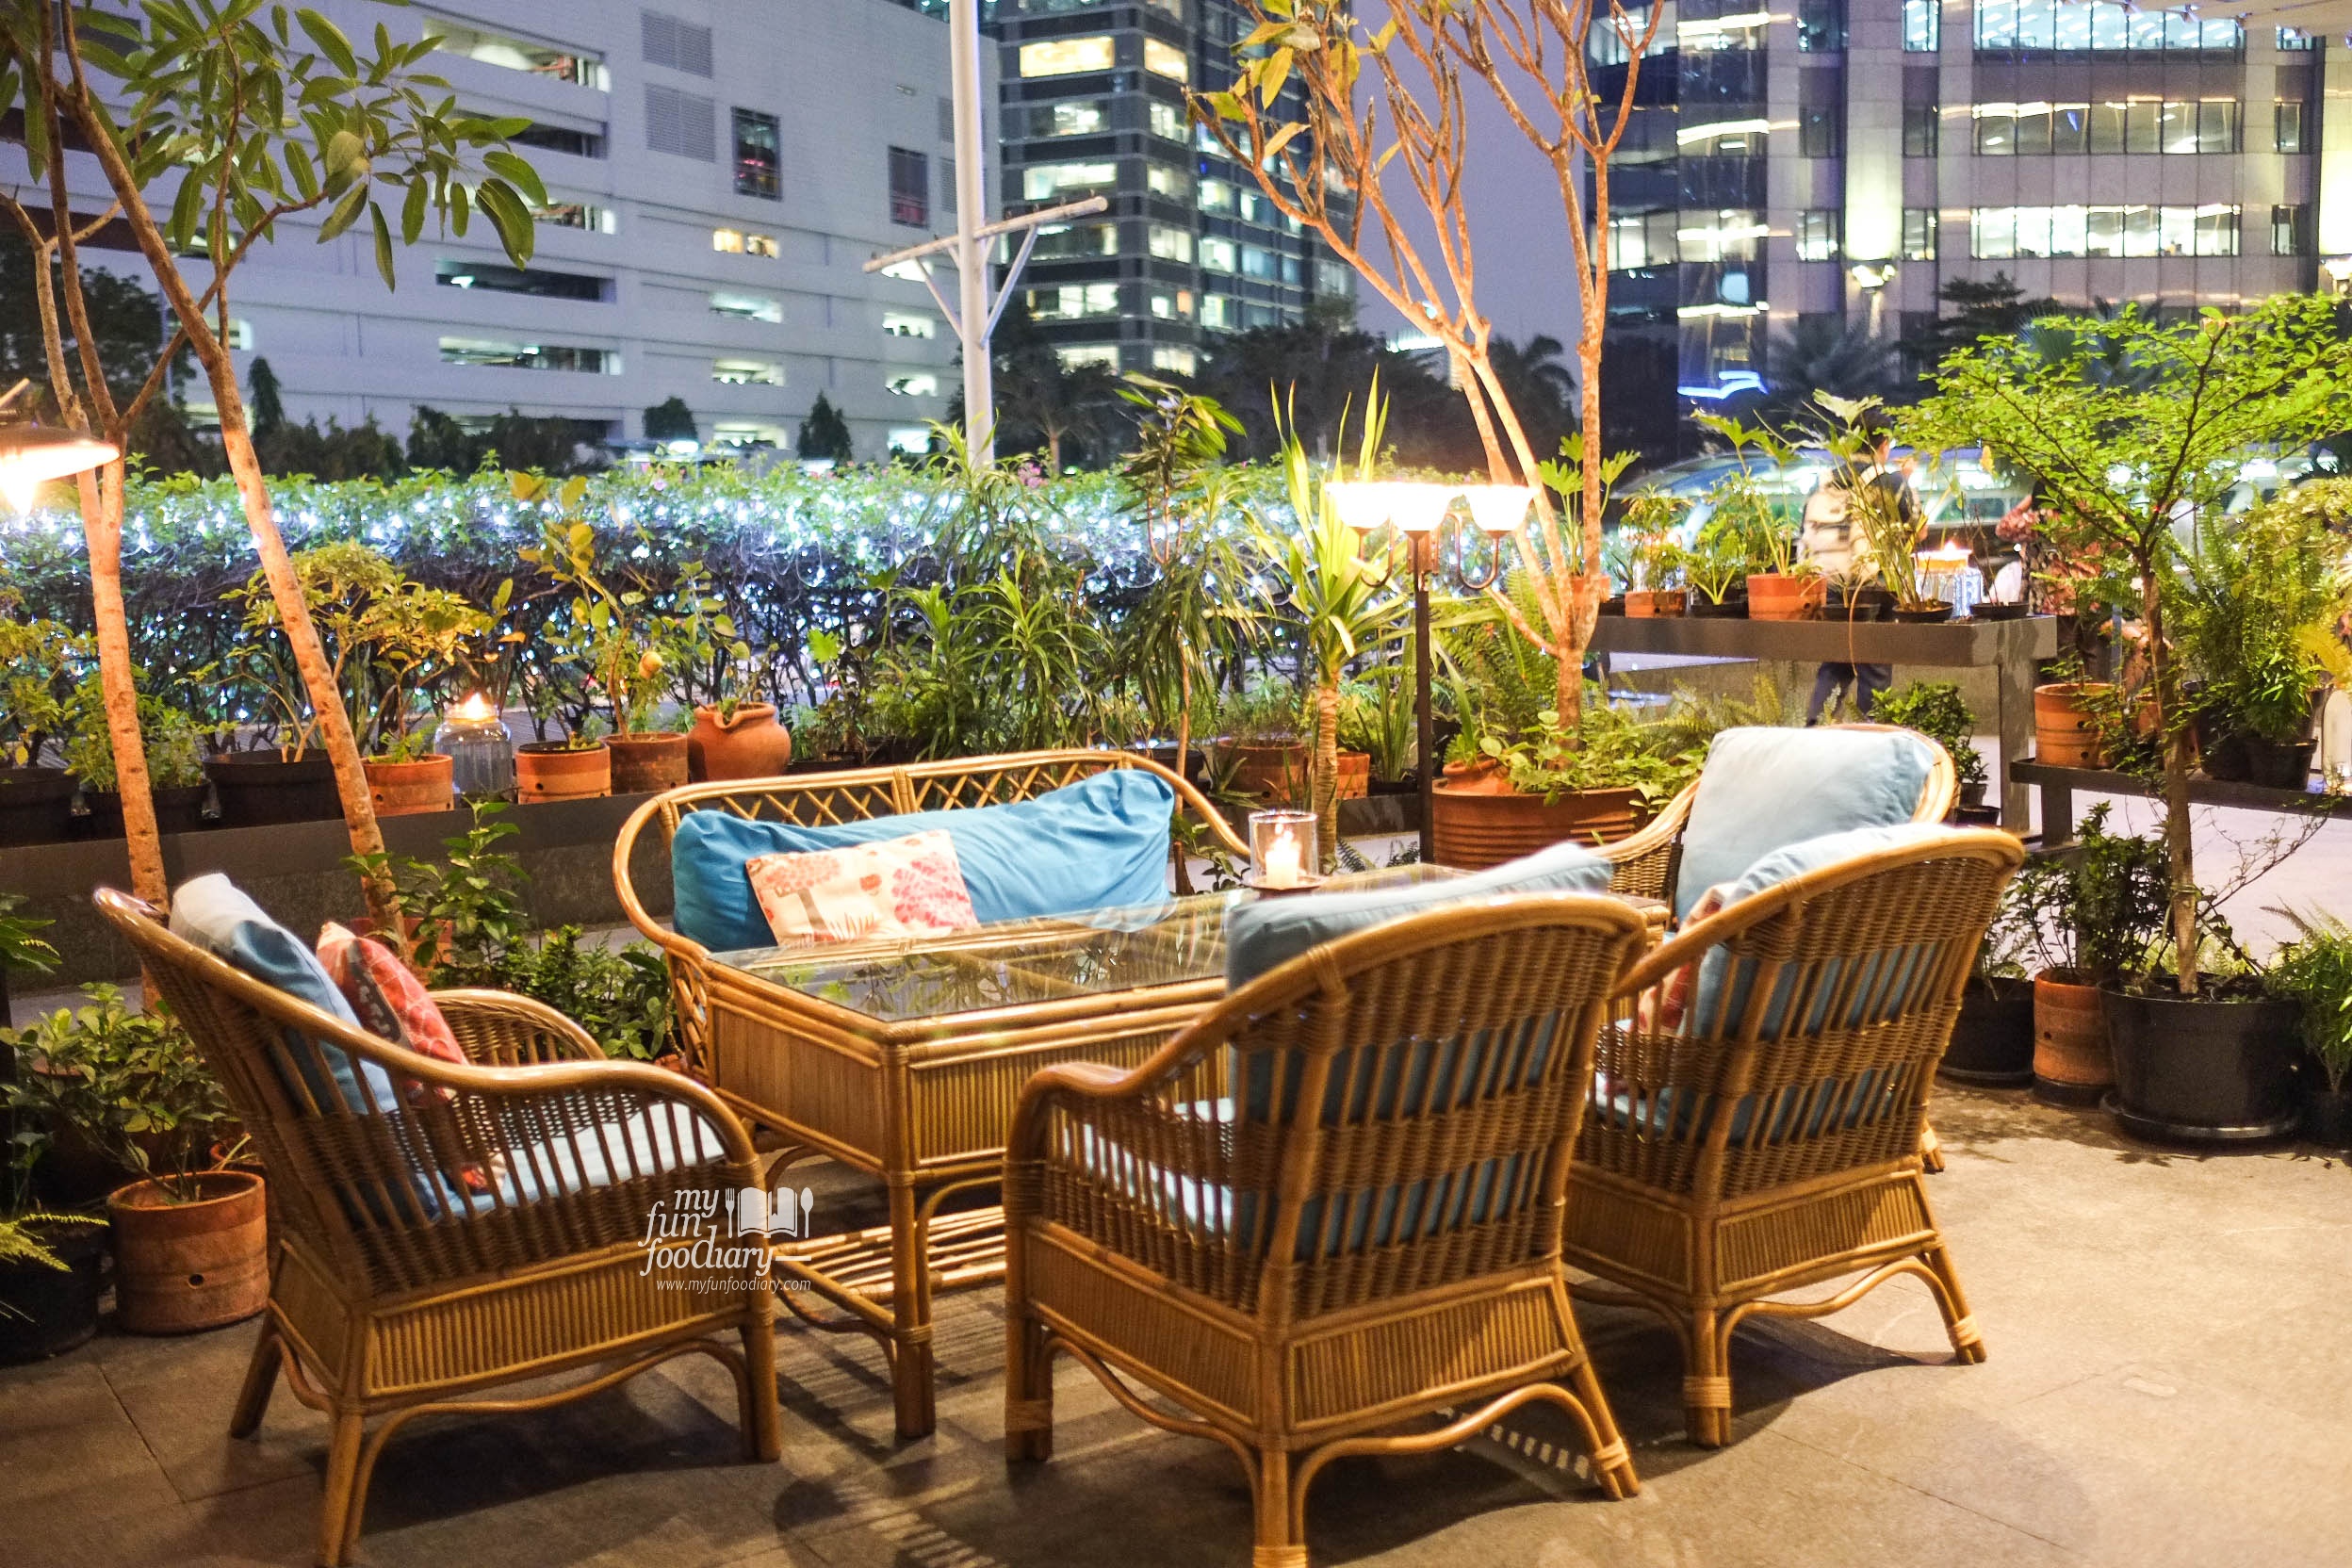 Outdoor Ambience at Potato Head SCBD Pacific Place Jakarta by Myfunfoodiary